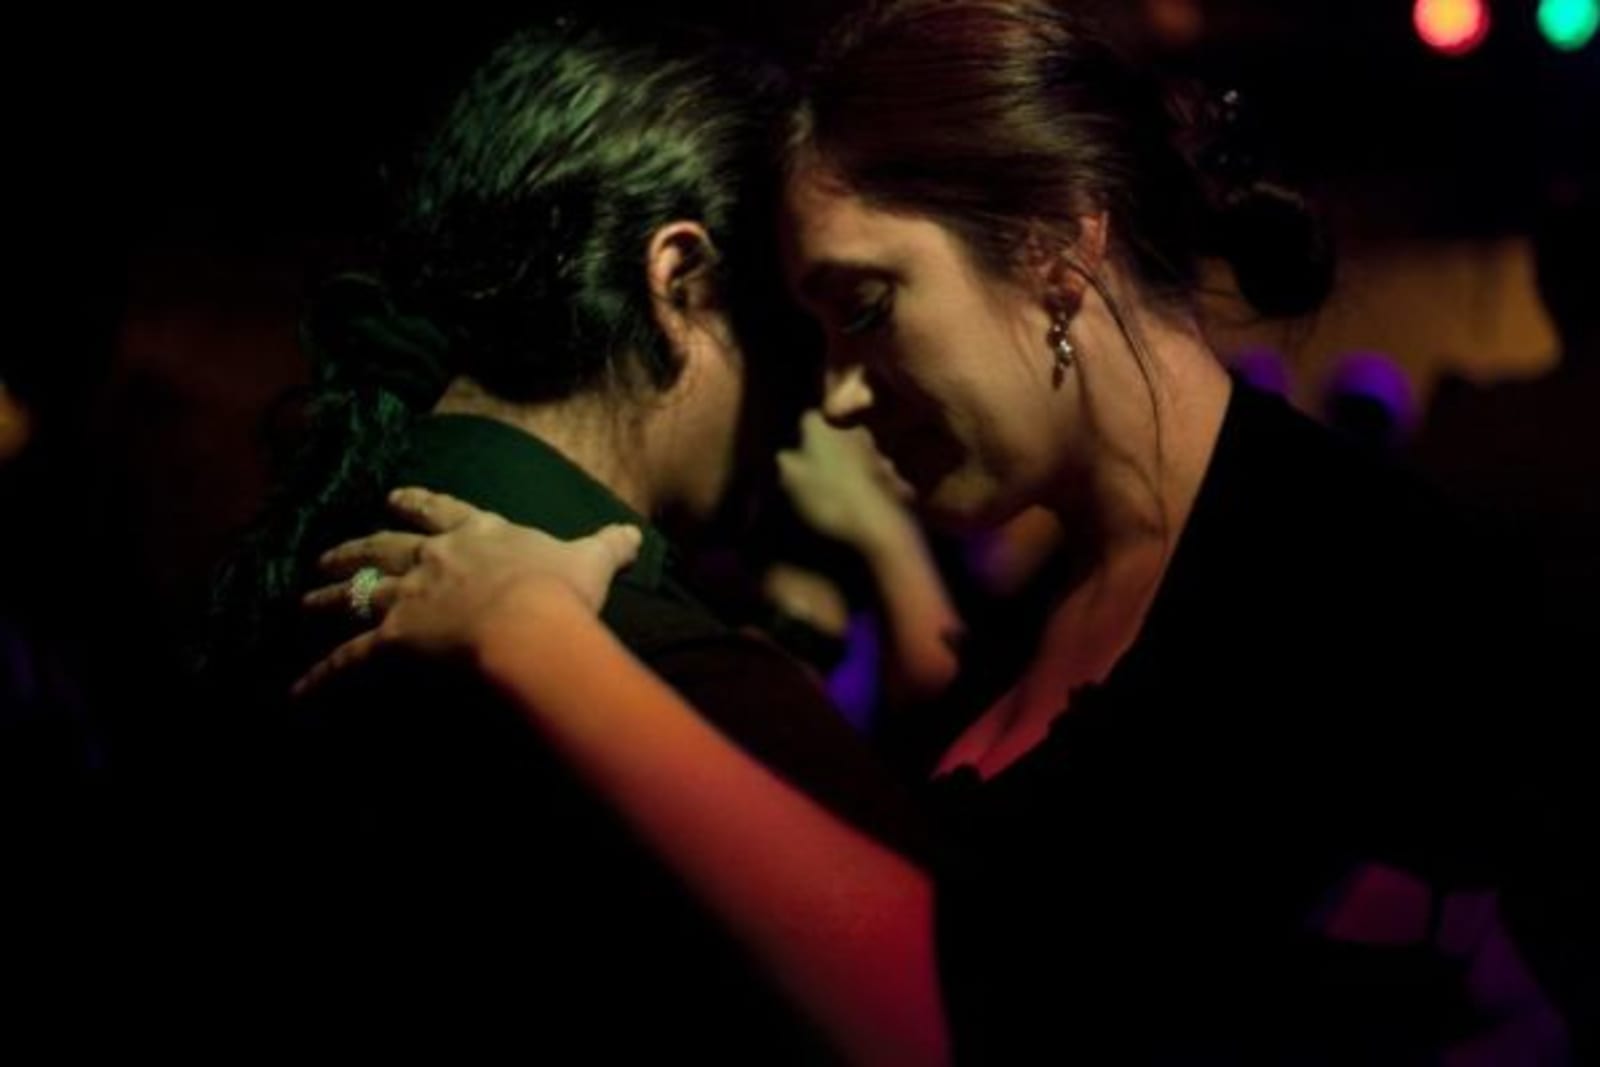 Male and female dancing in dark room, spots of coloured light hitting their faces